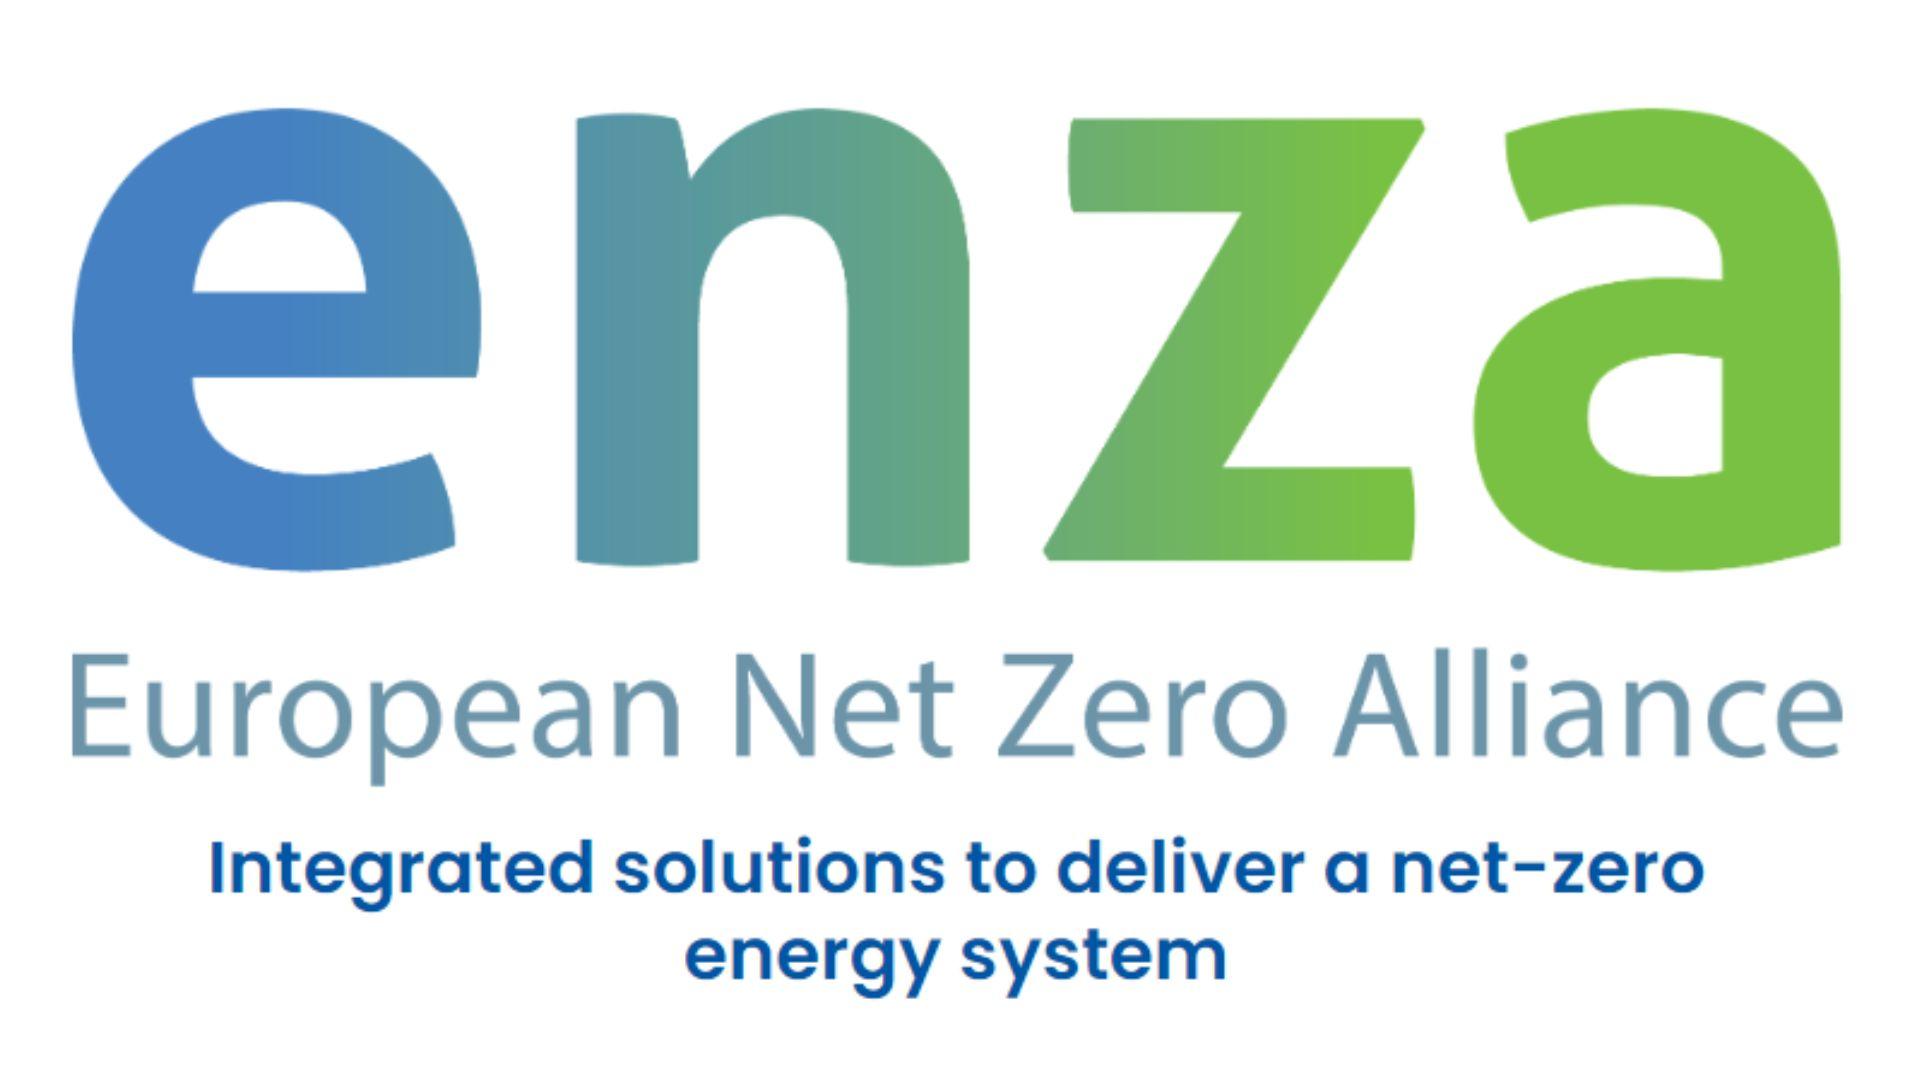 Product HYFLEXPOWER featured by the European Net Zero Alliance - Hyflexpower image